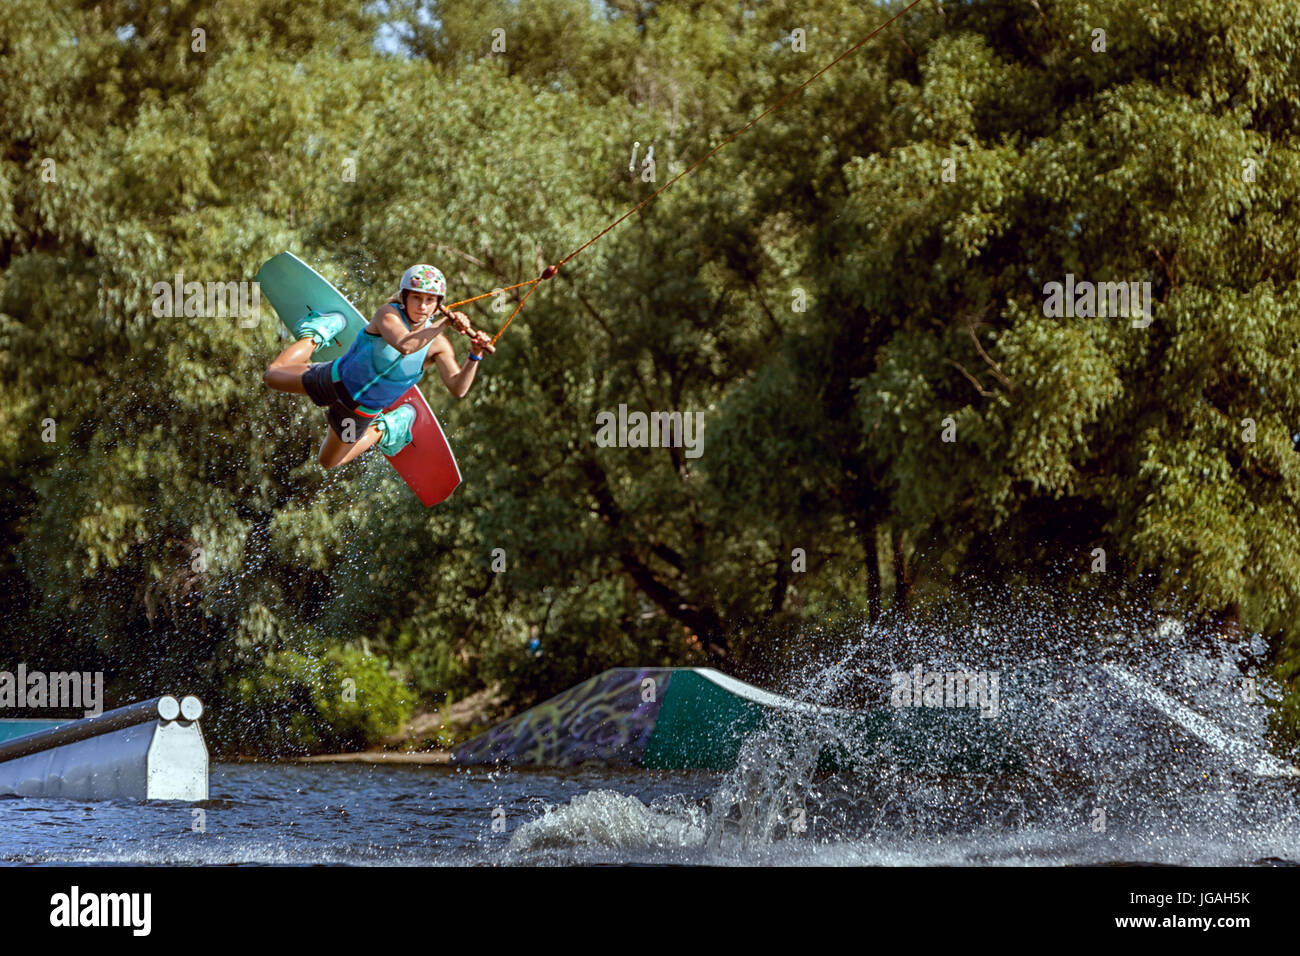 Sports training on a wakeboard. Jumping over water and tricks. Stock Photo